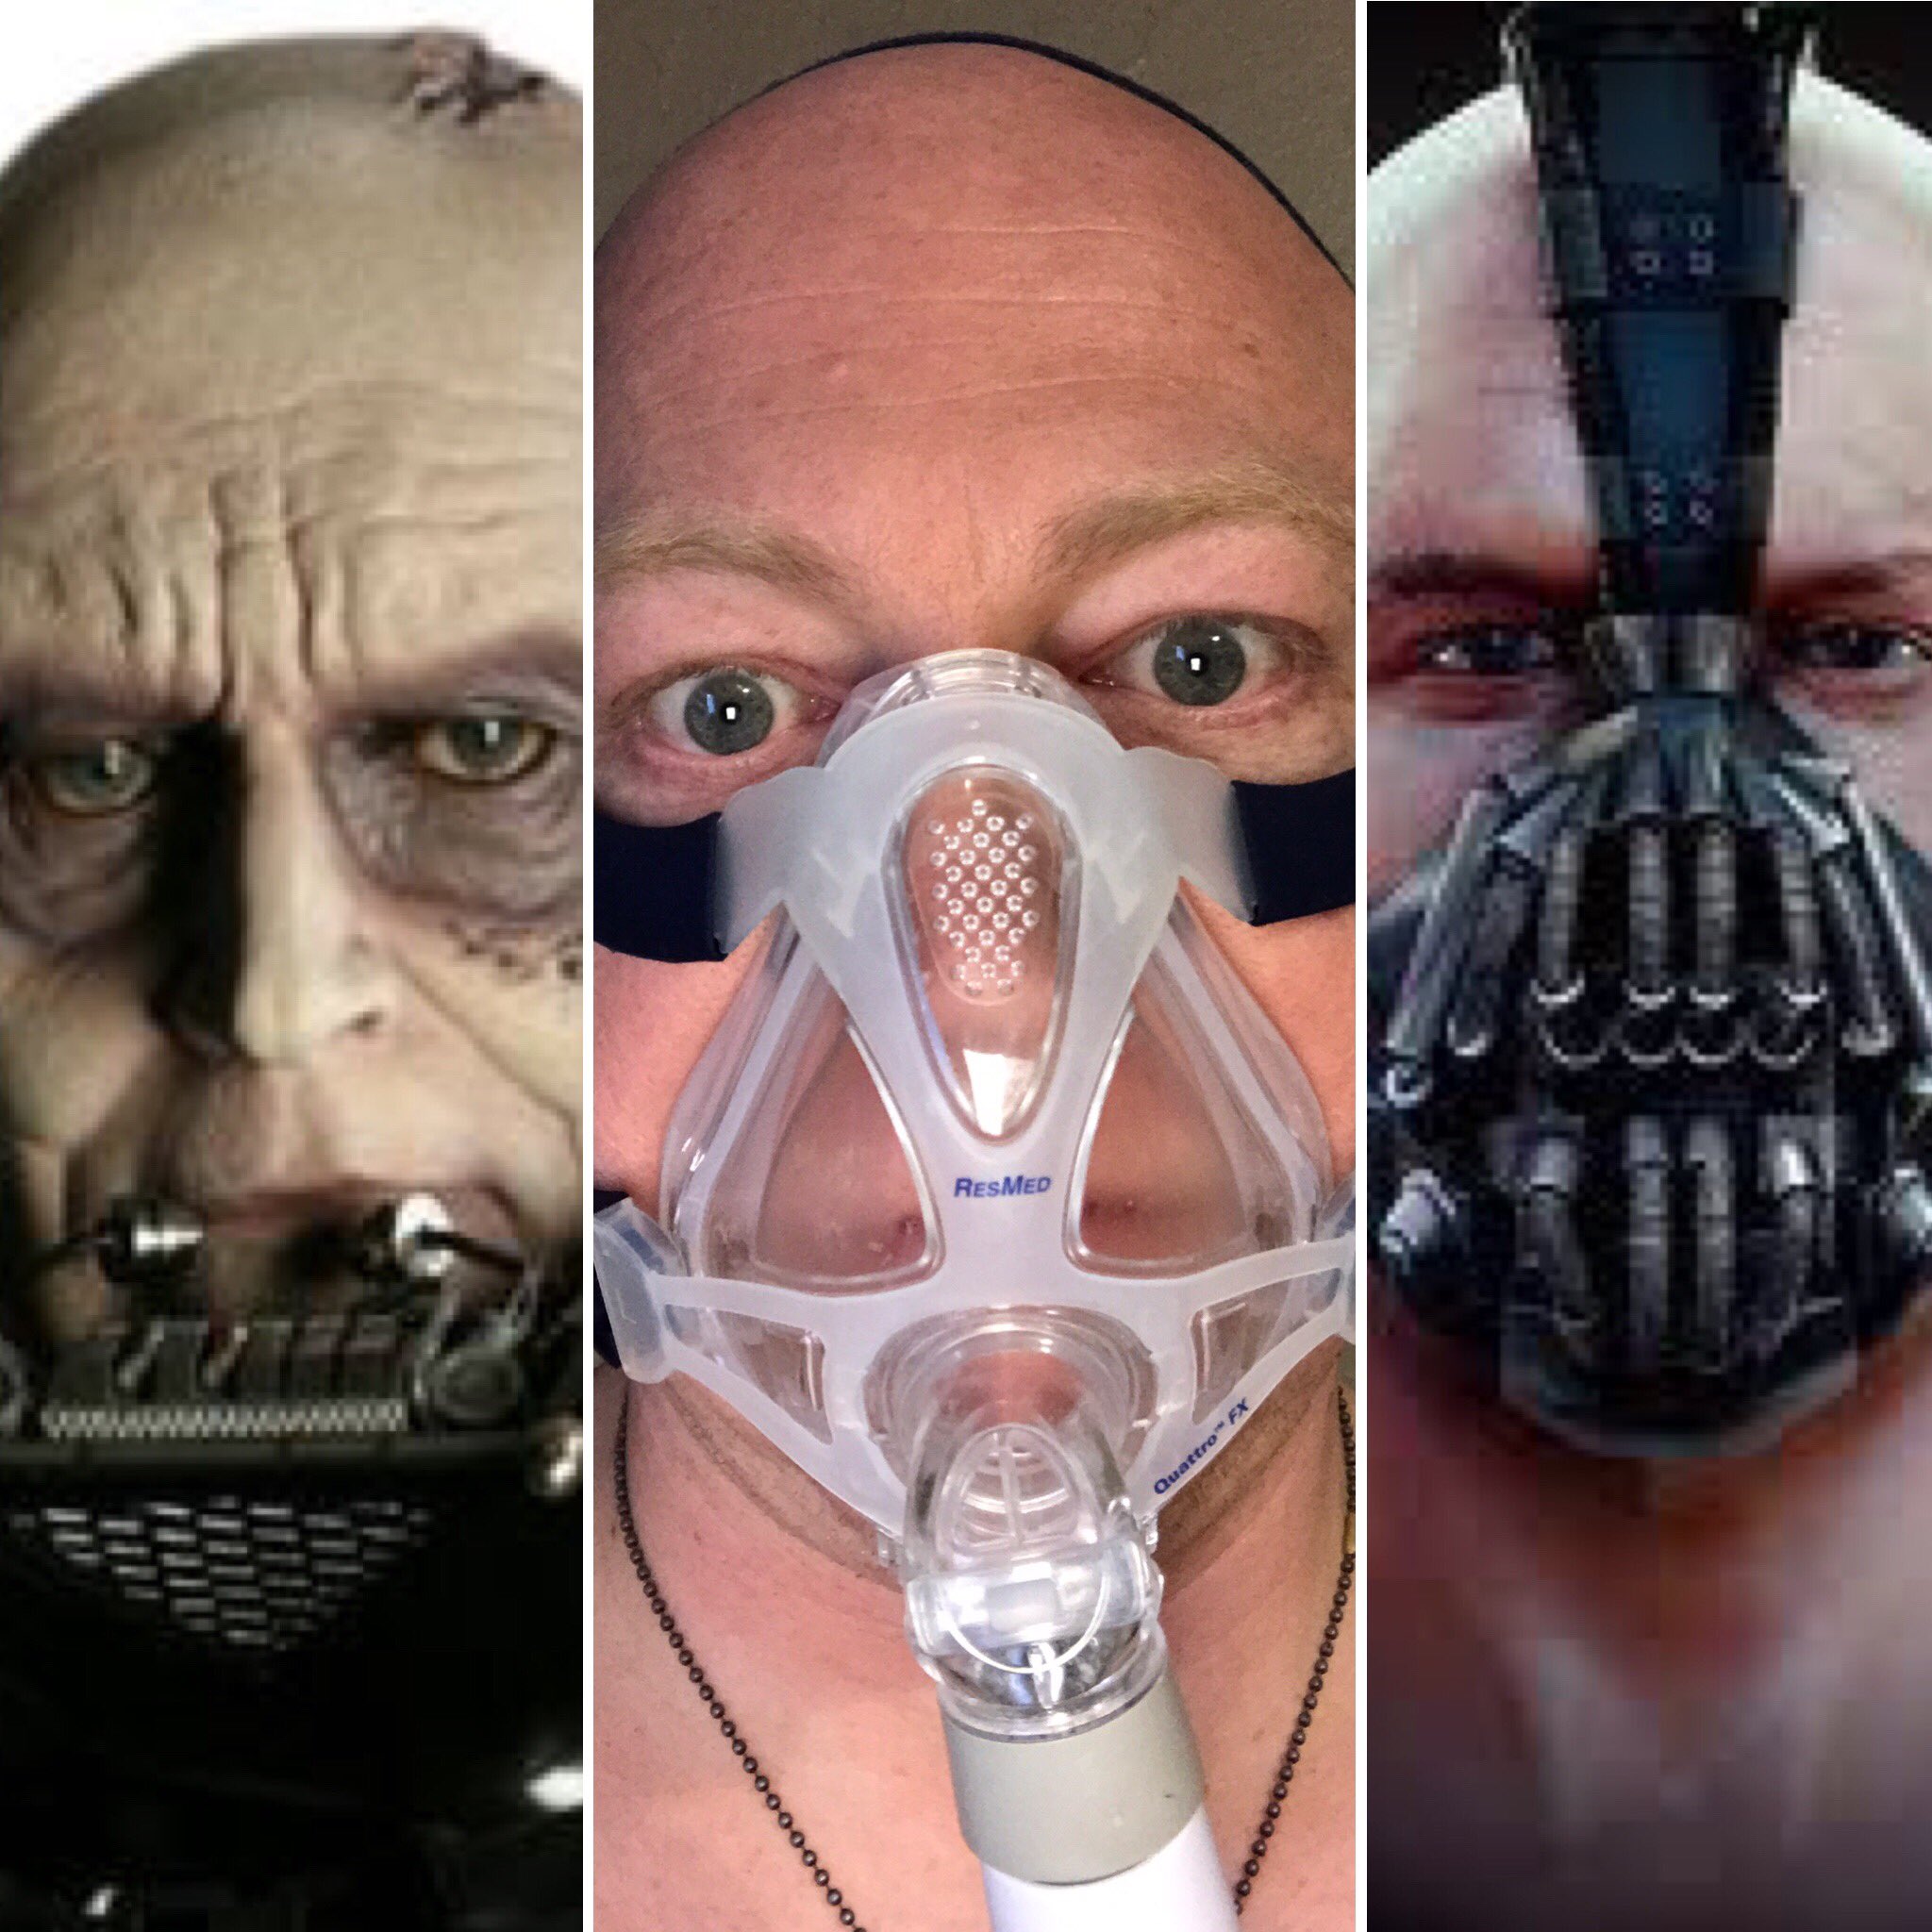 Uplifted Hummingbird Korea Josh Highland 🤘🏻 on Twitter: "With my new bald head and #CPAP mask, I  can't decide if I'm more like dying darth Vader or Bane.  https://t.co/844xT85f69" / Twitter